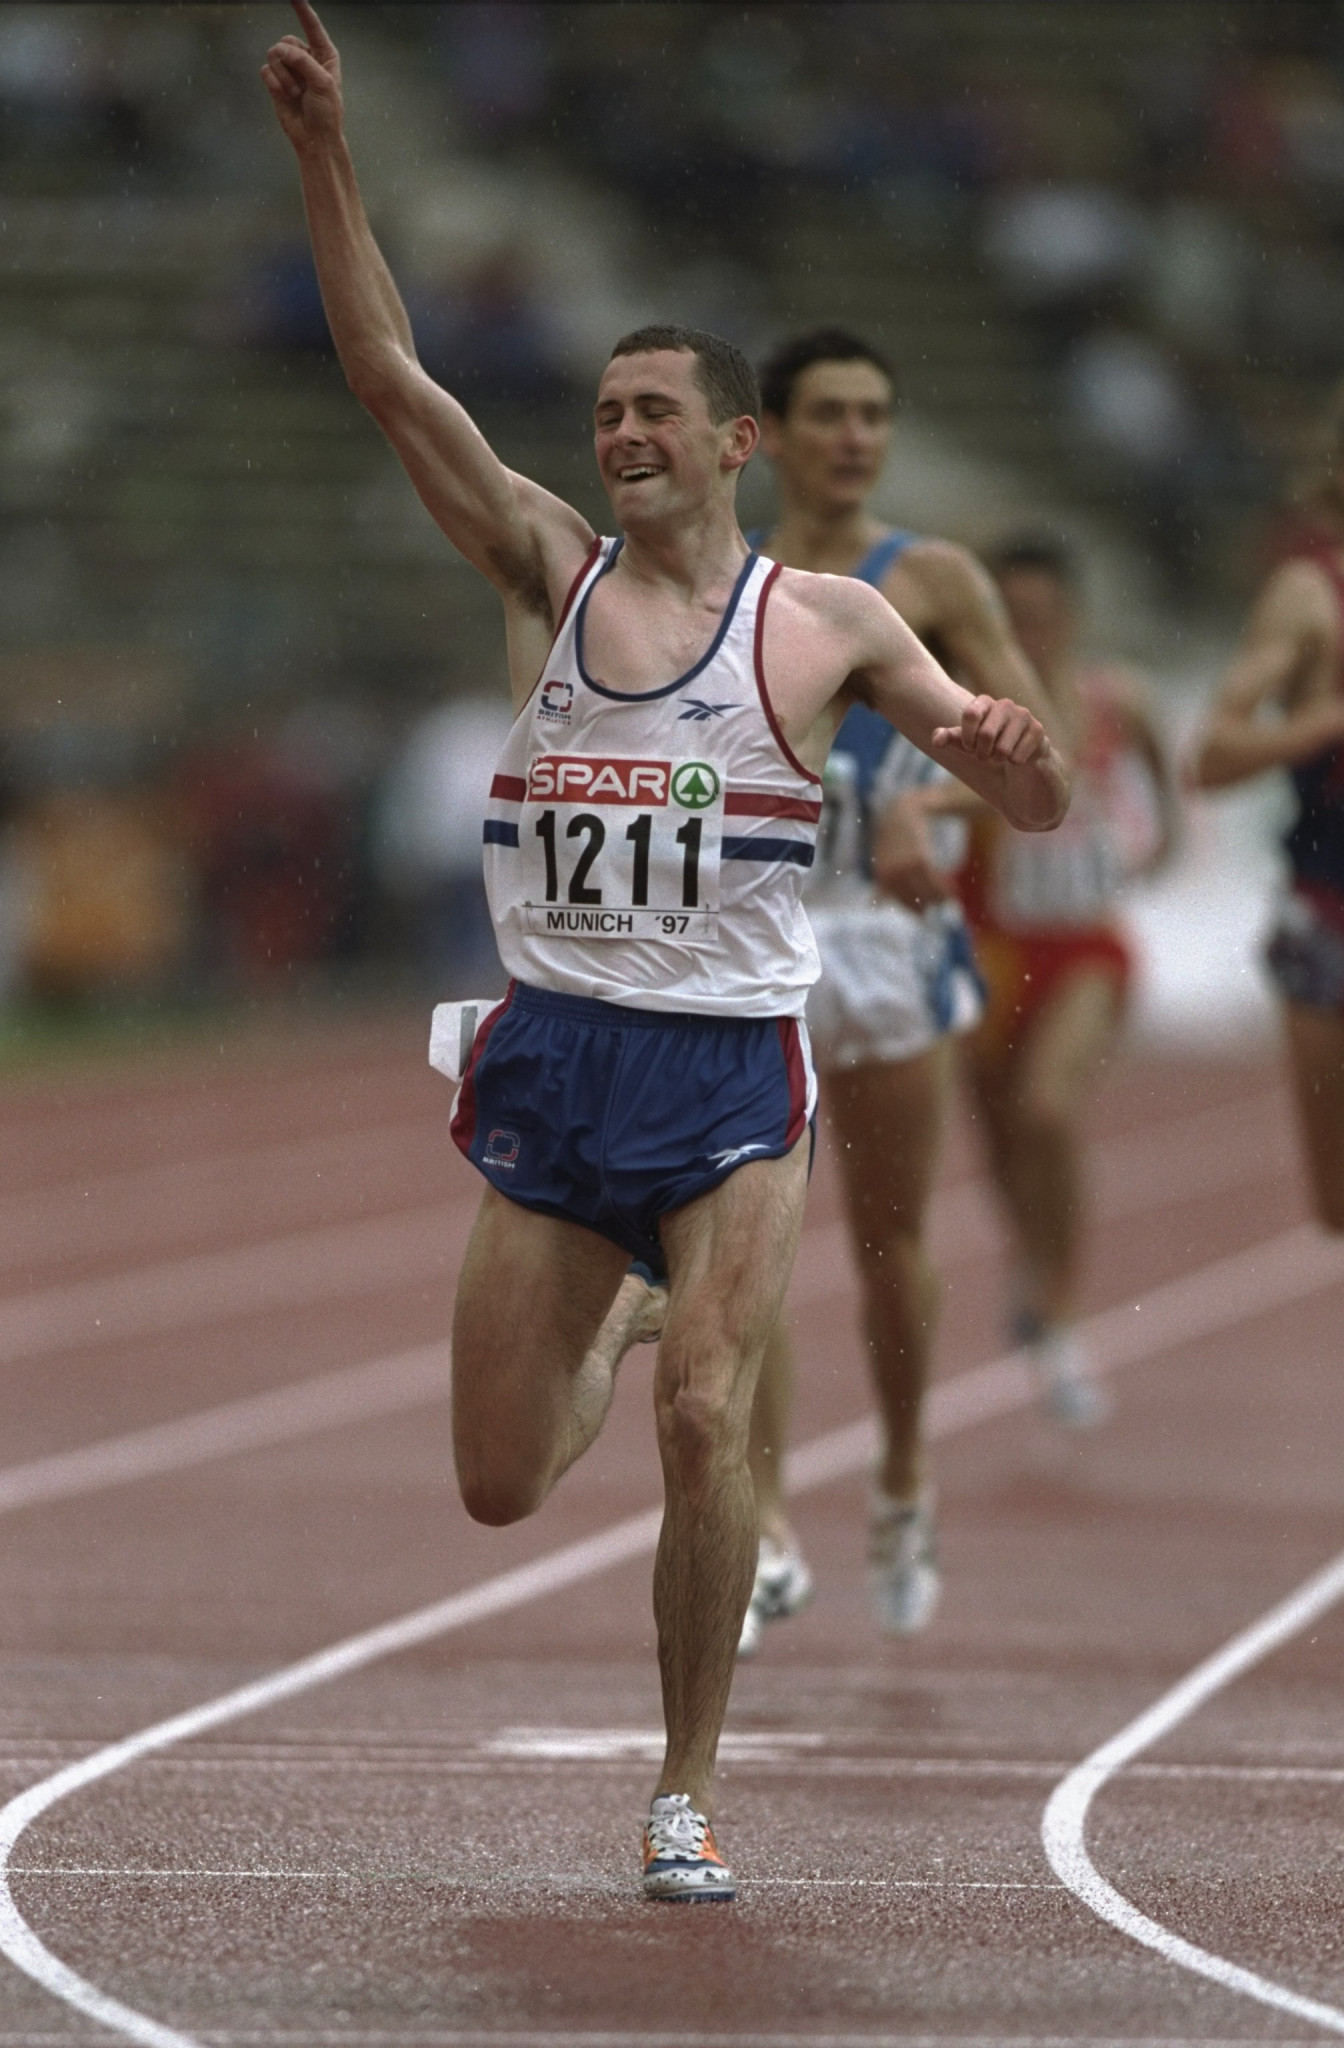 Robert Hough's surprise victory in the 3,000m steeplechase at the 1997 European Cup in Munich was the perfect illustration of how everyone's contribution in a team competition is important ©Getty Images